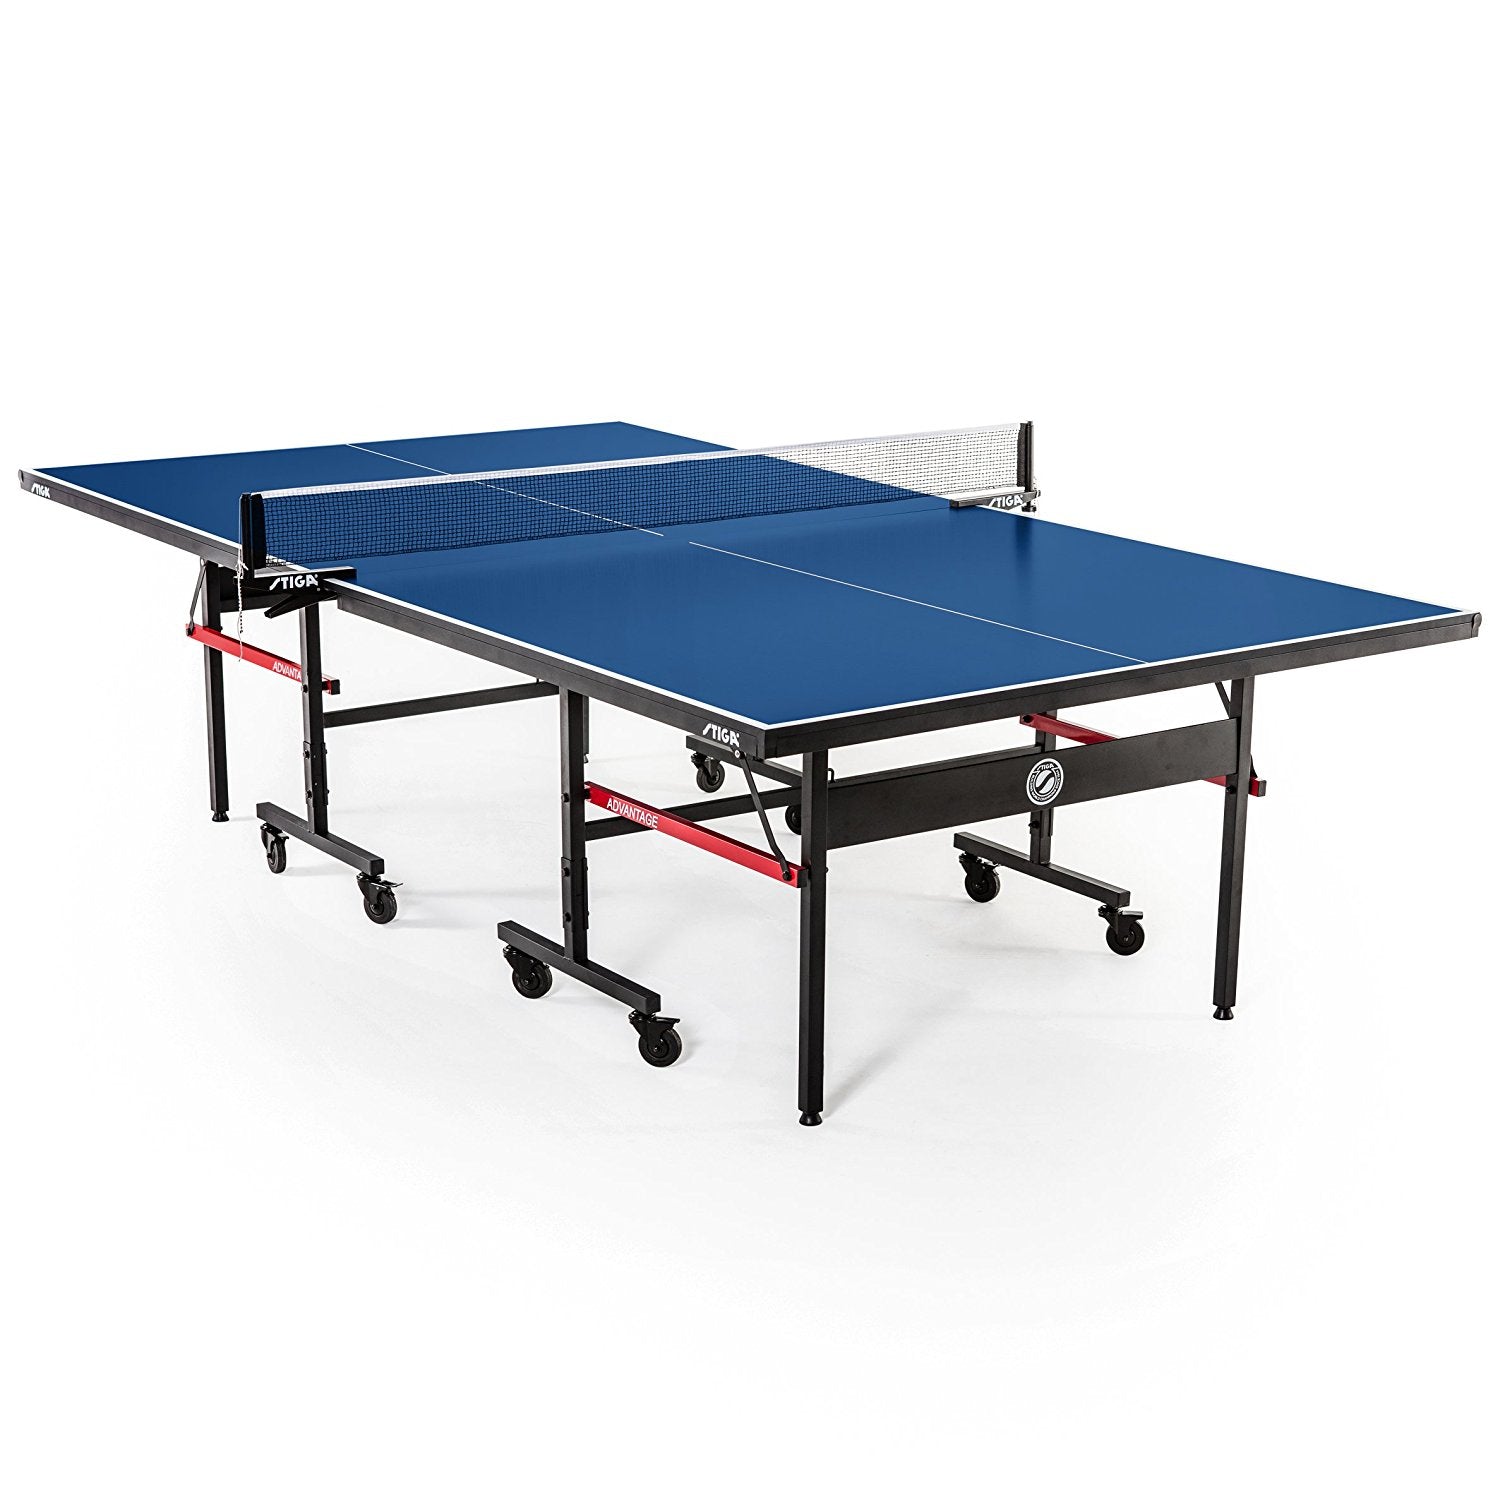 Advantage Competition-Ready Indoor Table Tennis Table with Excellent Playability, Easy Storage and 10-minute Assembly